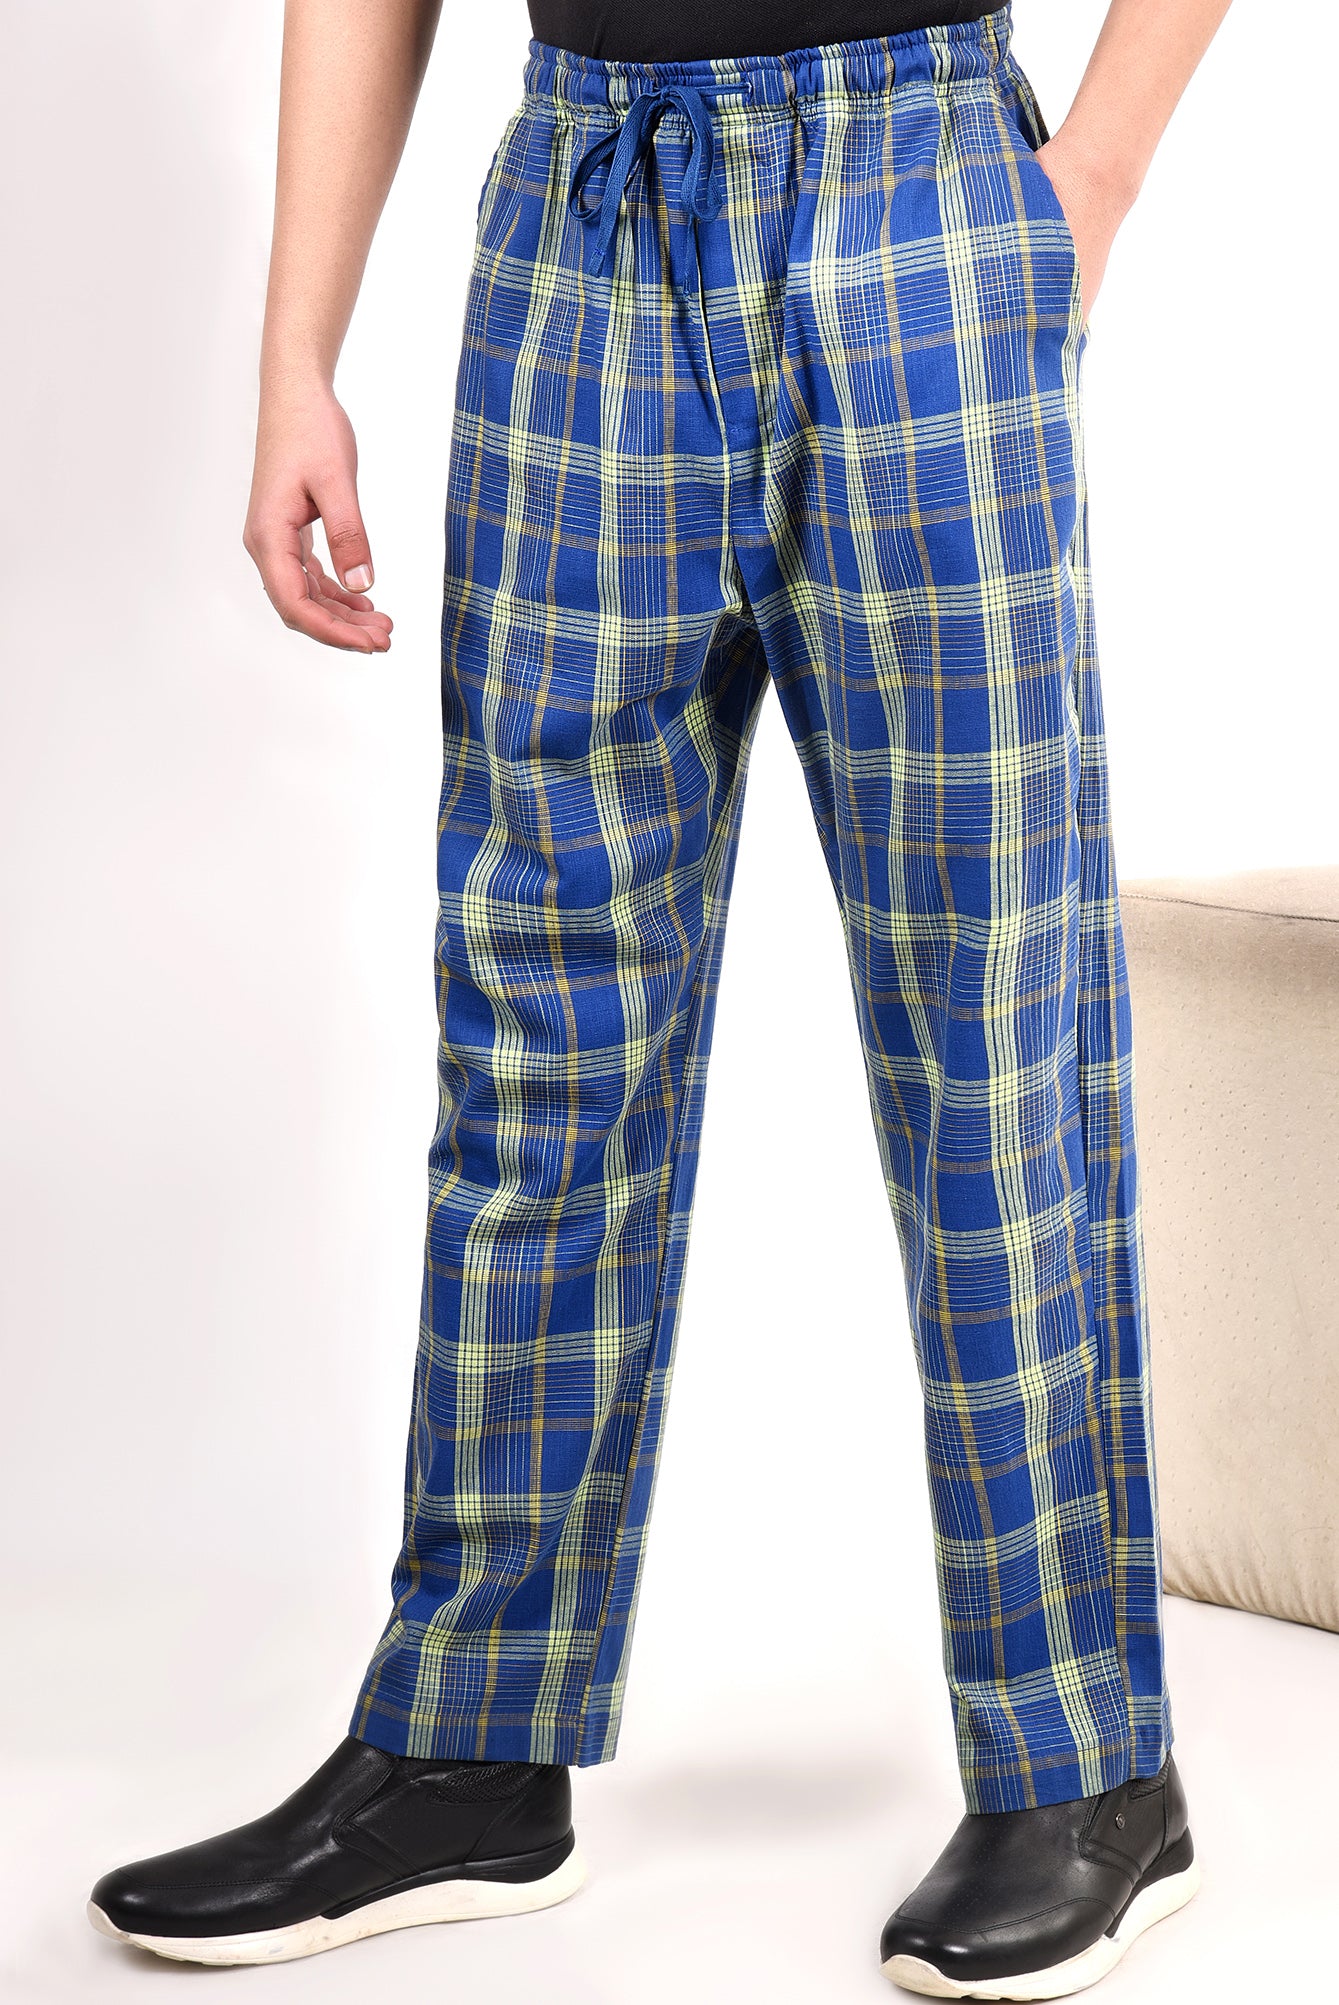 GTS-6281 PULL ON TROUSER BLUE CHECK